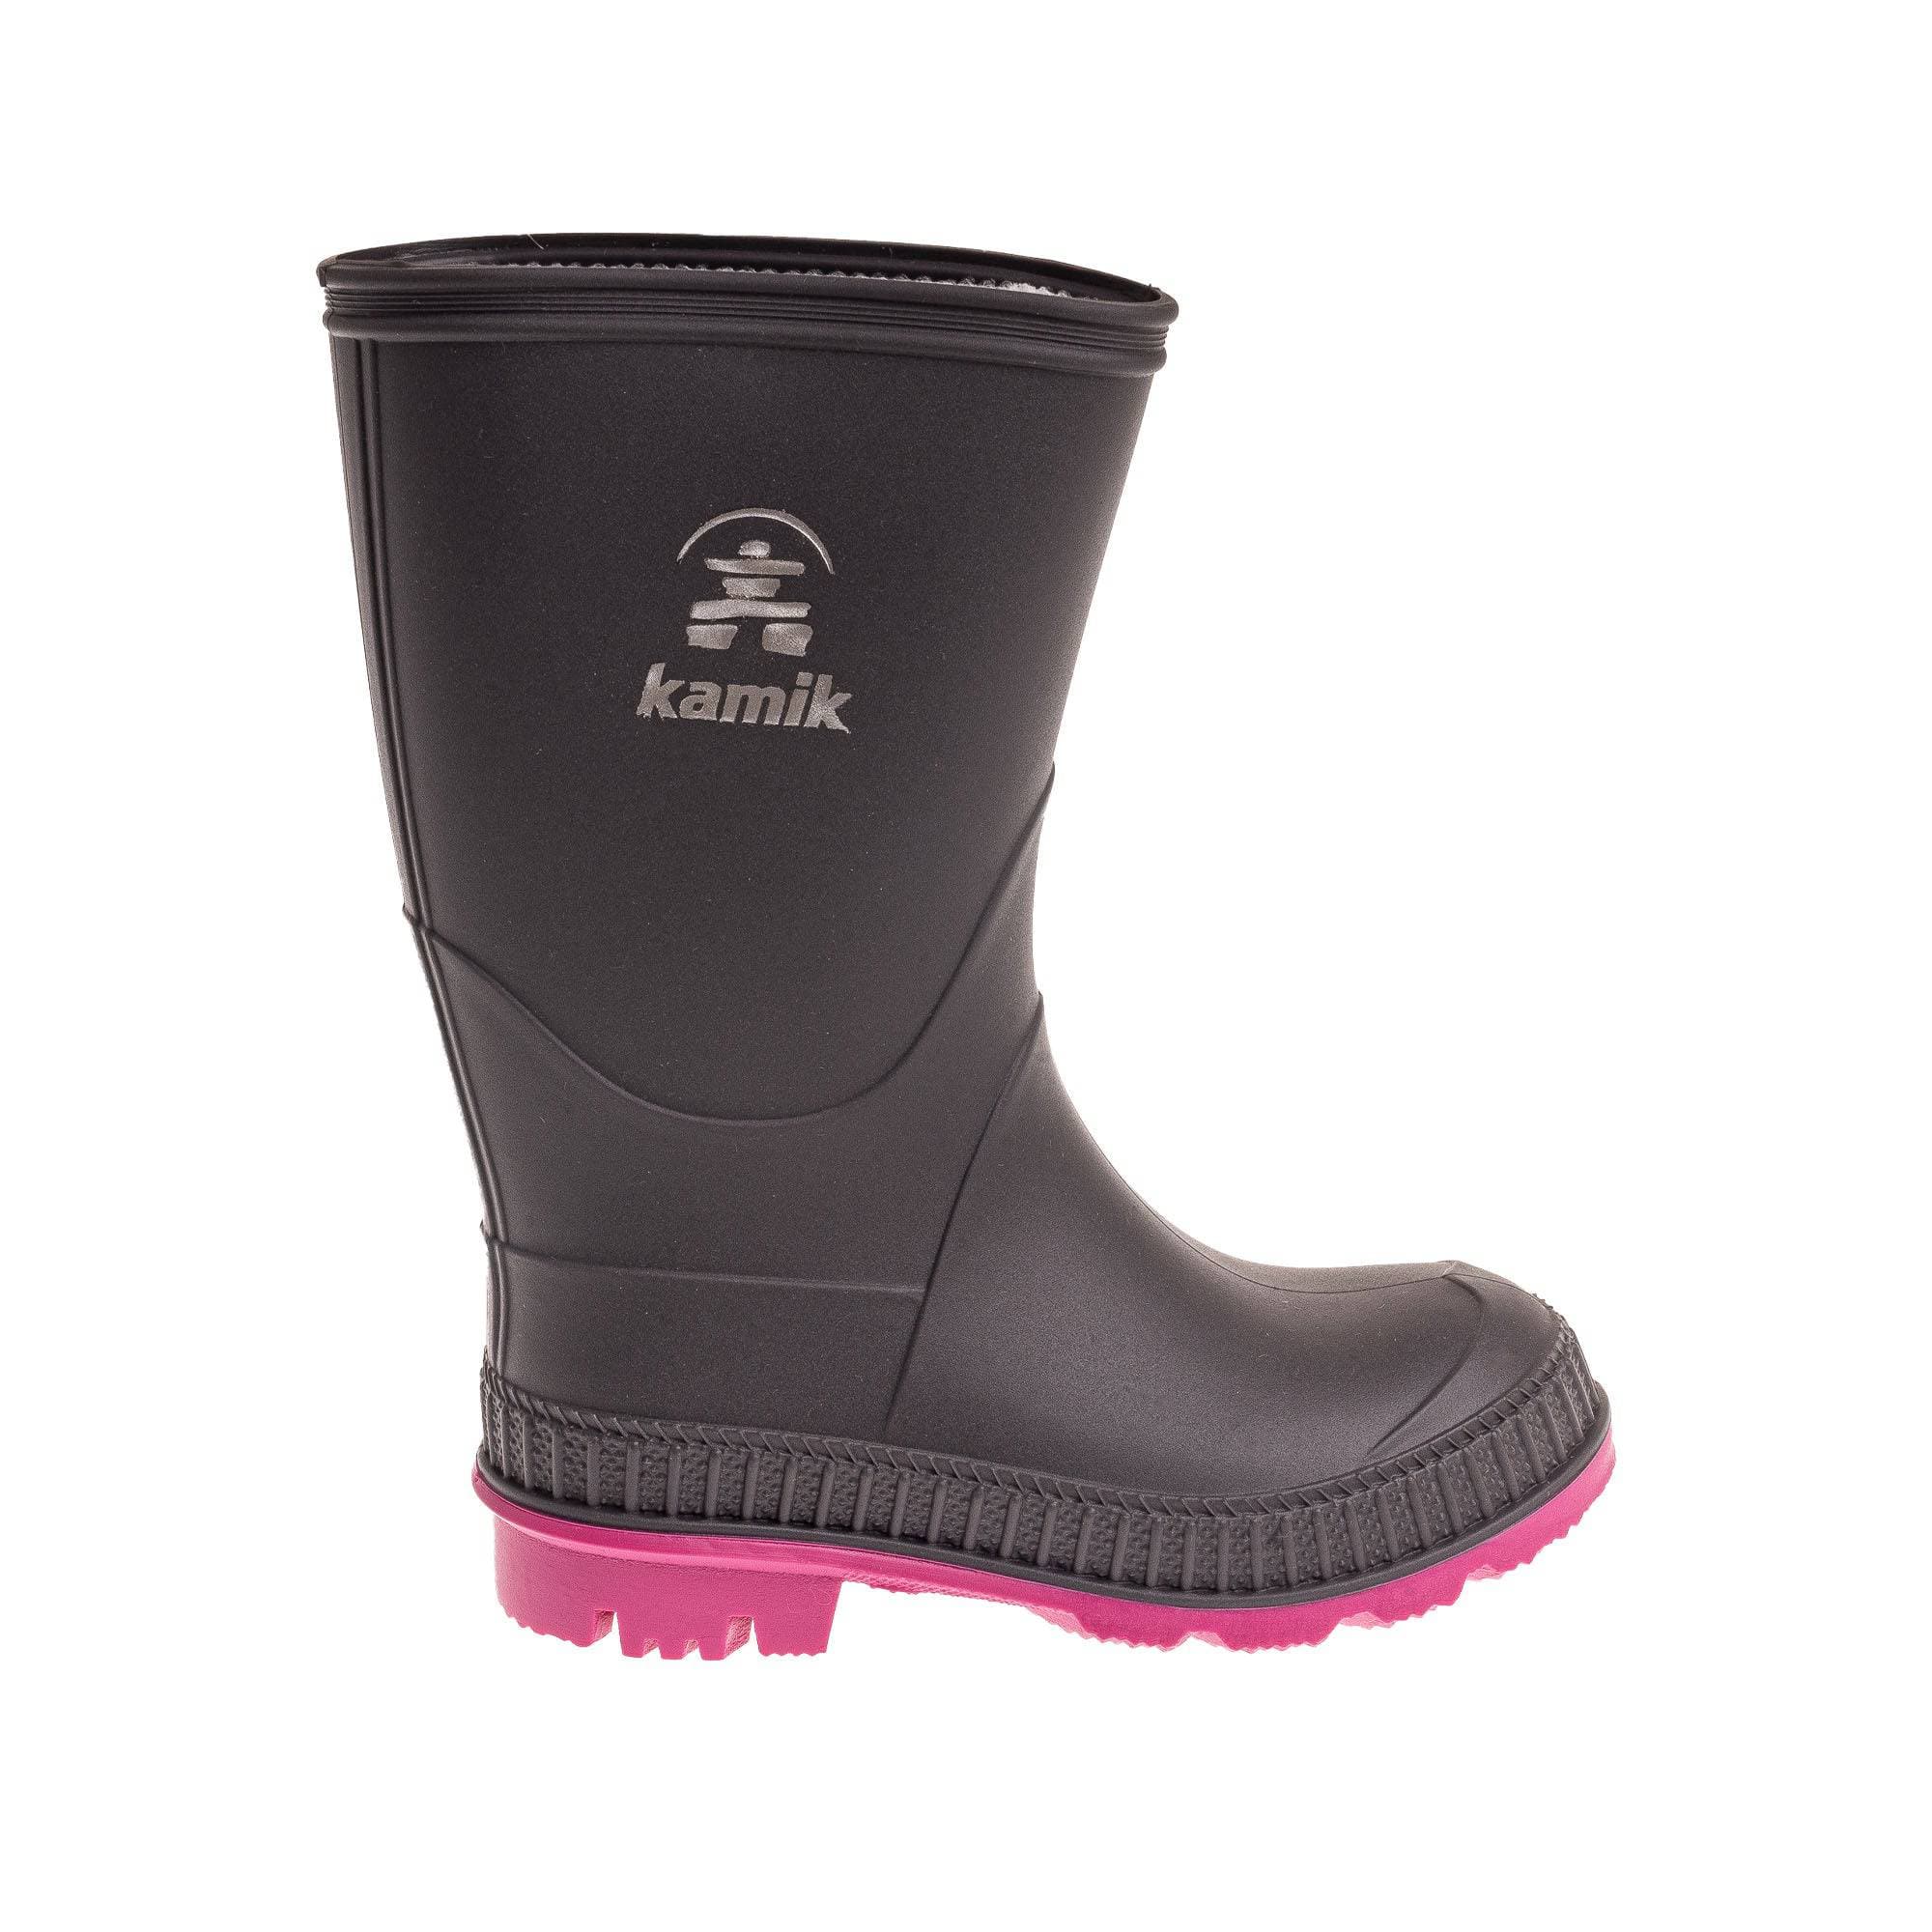 Toddlers Stomp Rainboots - Charcoal - DNA Footwear